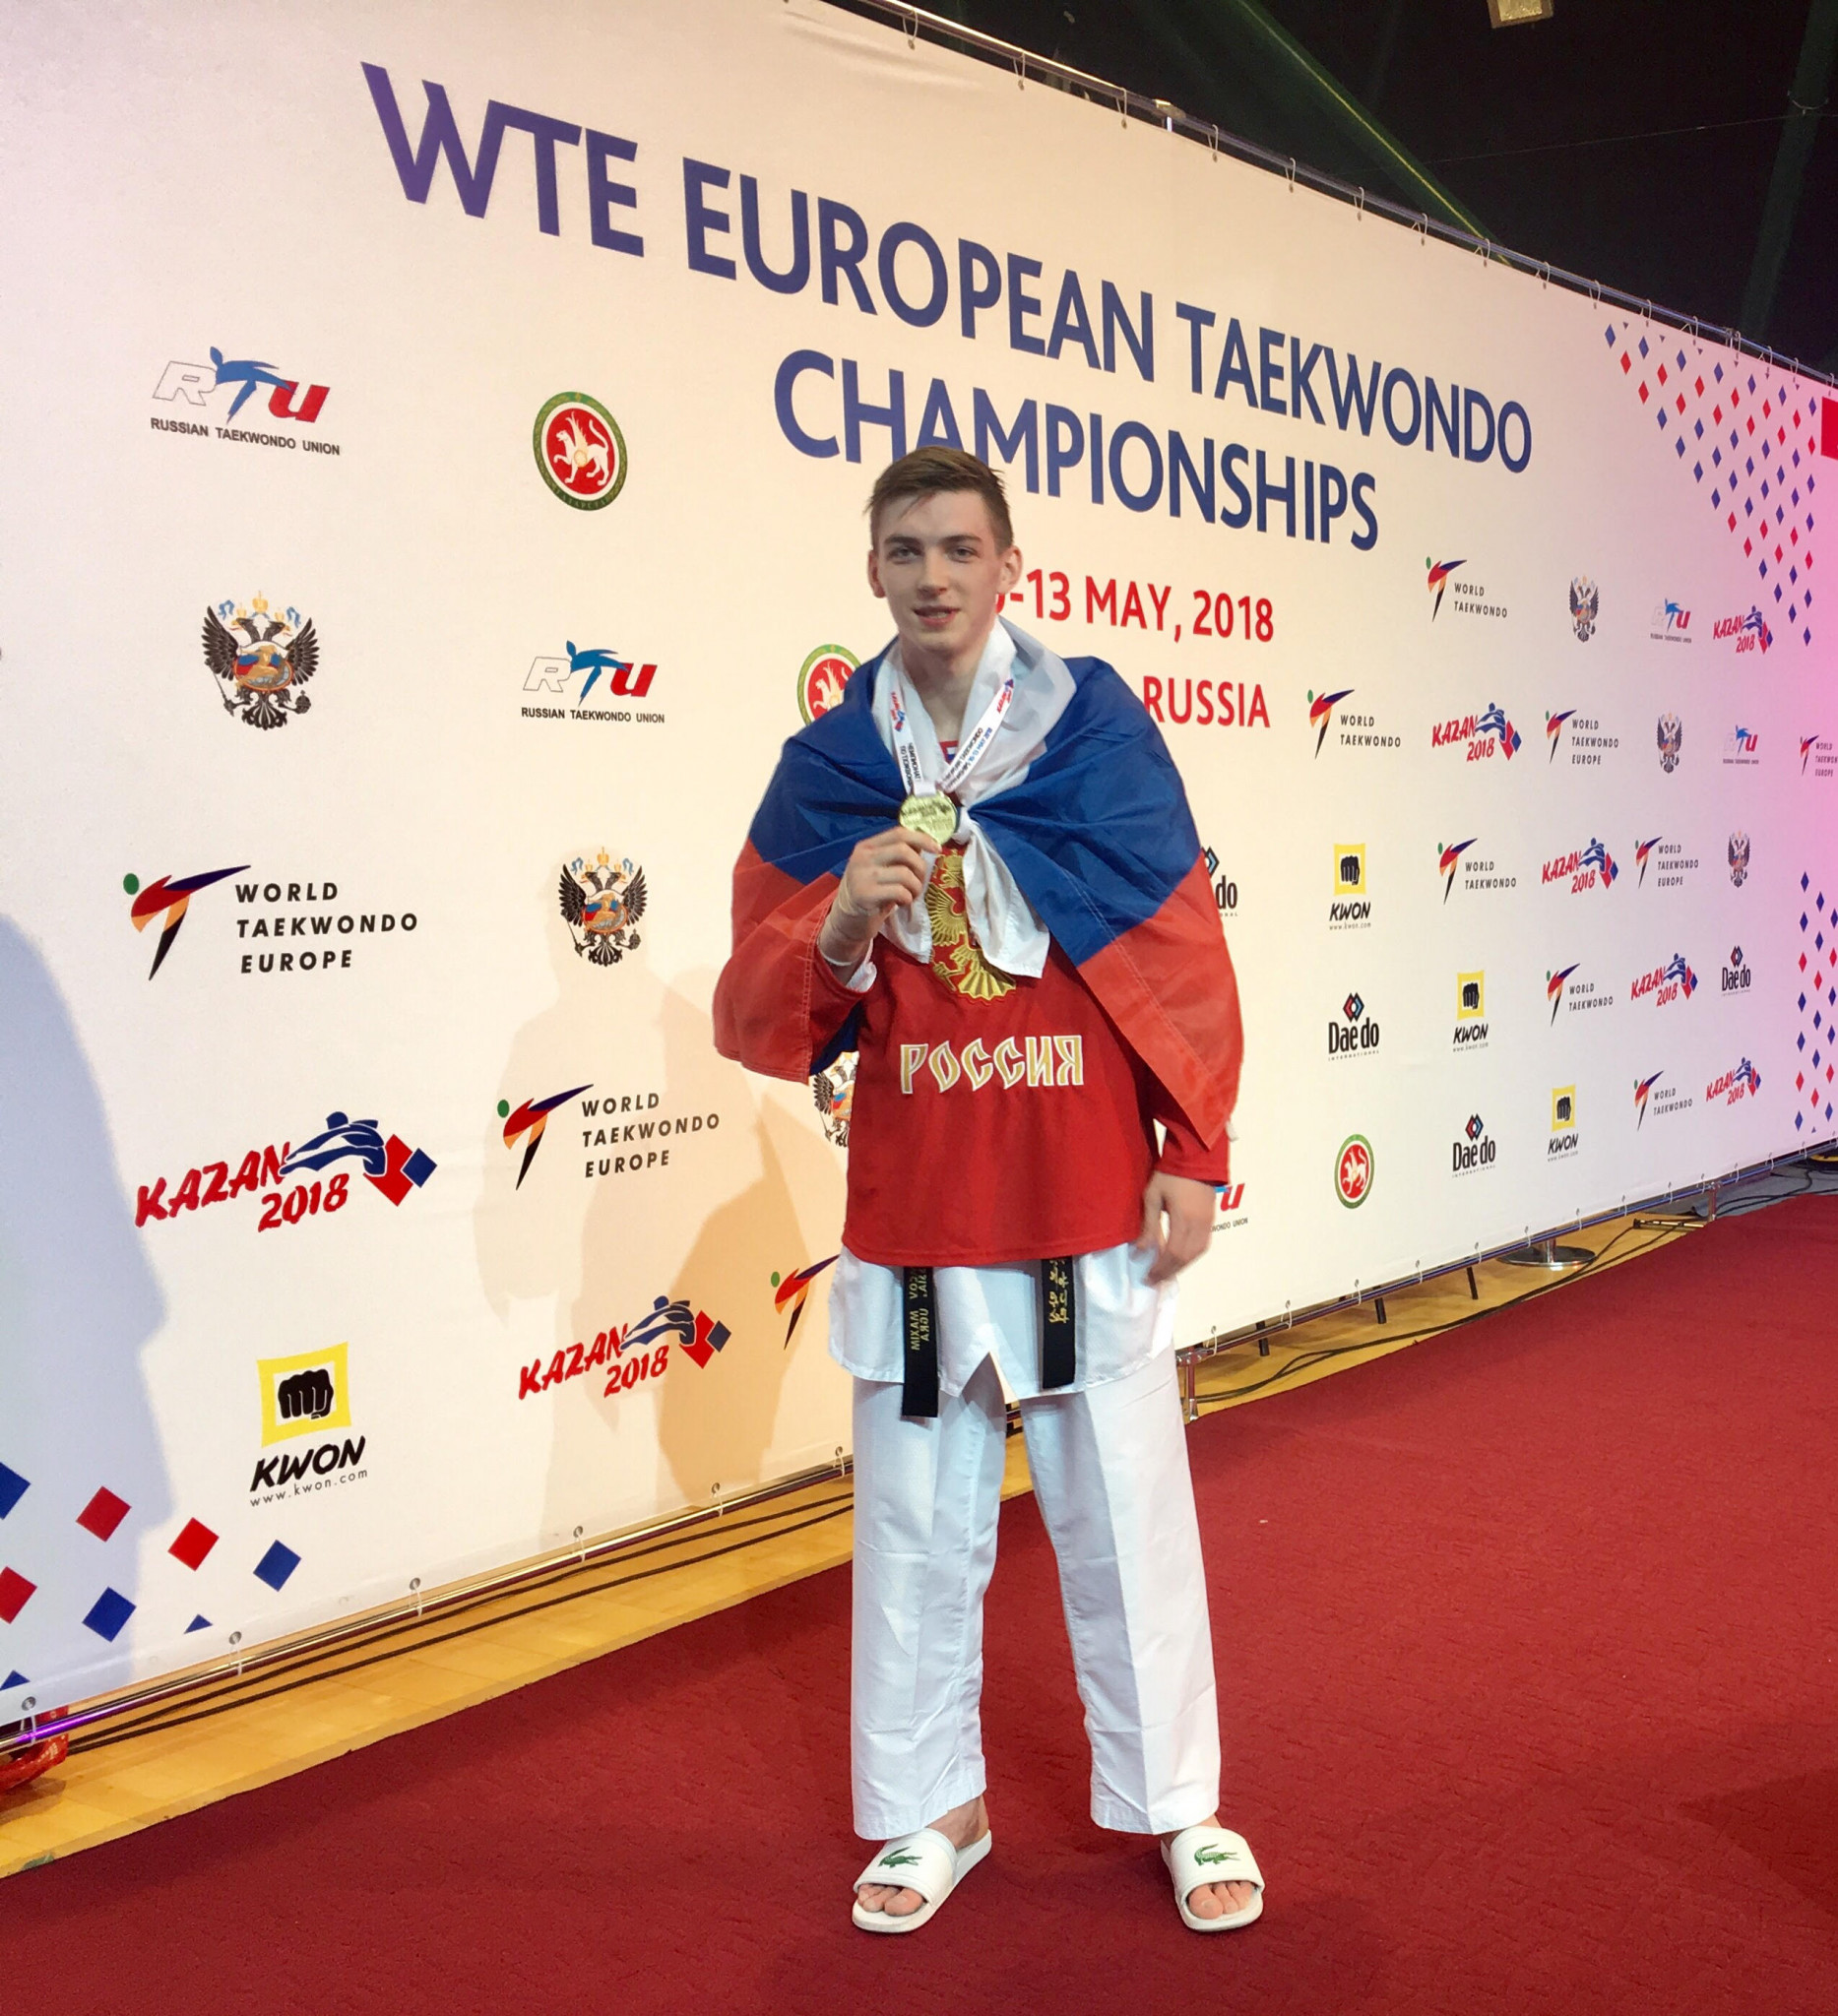 Maksim Khramtsov won Russia's only gold medal of the day ©WTE